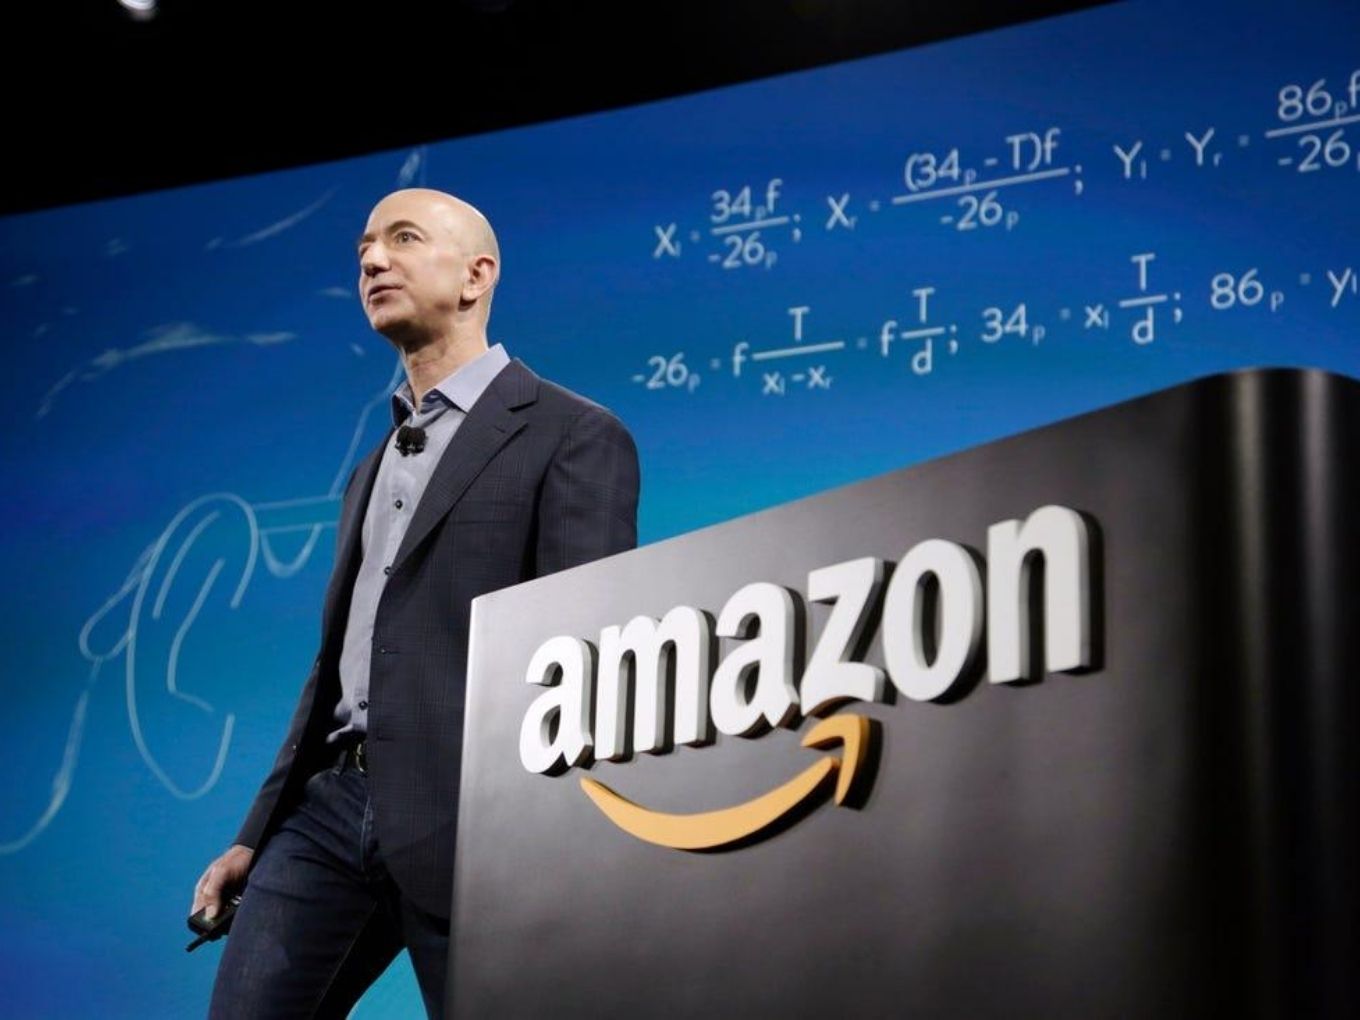 Sellers Question Amazon India Data Policy As Jeff Bezos Falters In US Congress Grilling